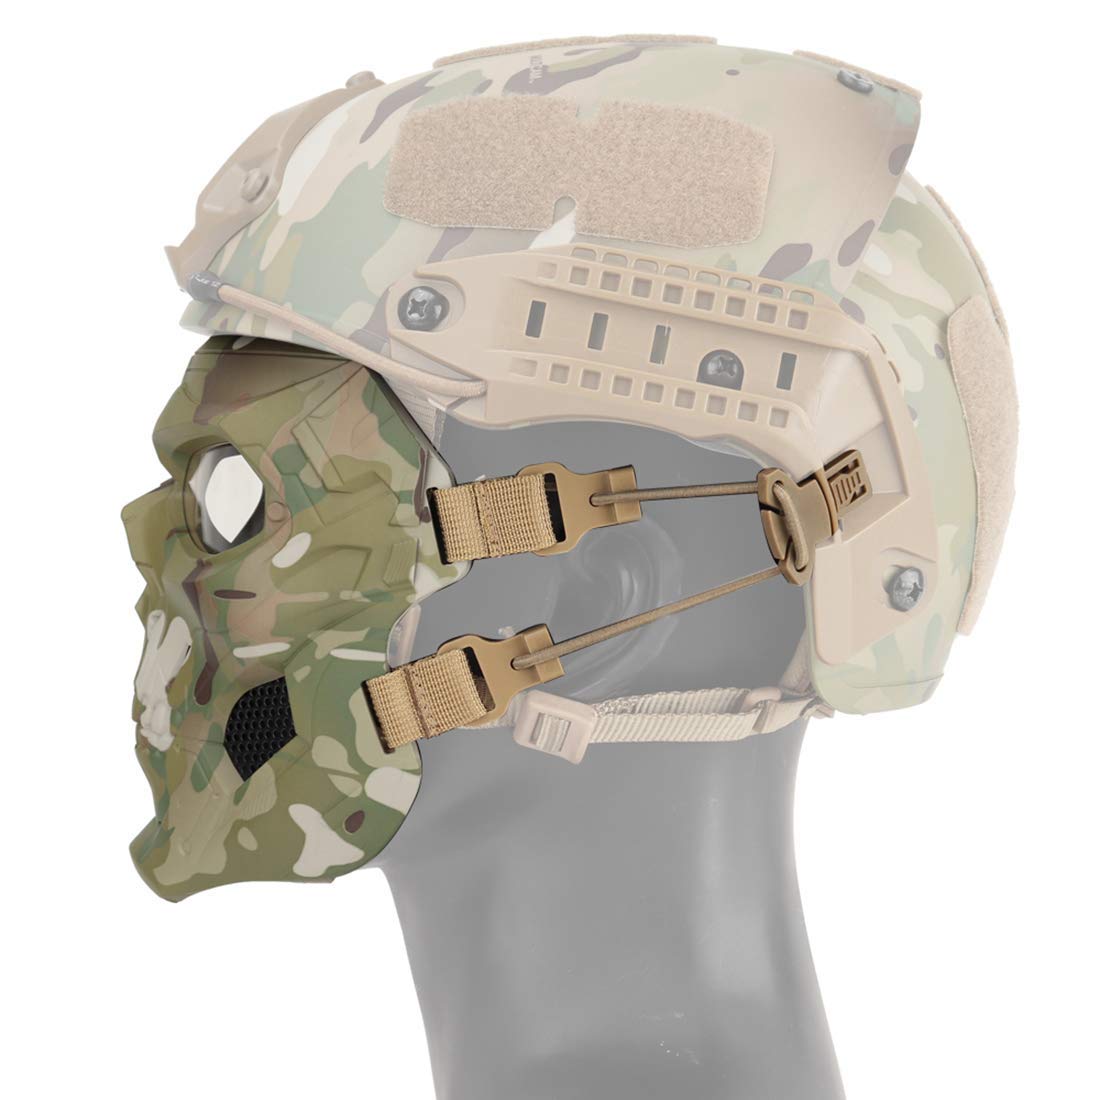 WoSporT Skull Airsoft Paintball Mask Full Face Tactical Halloween Party Mask